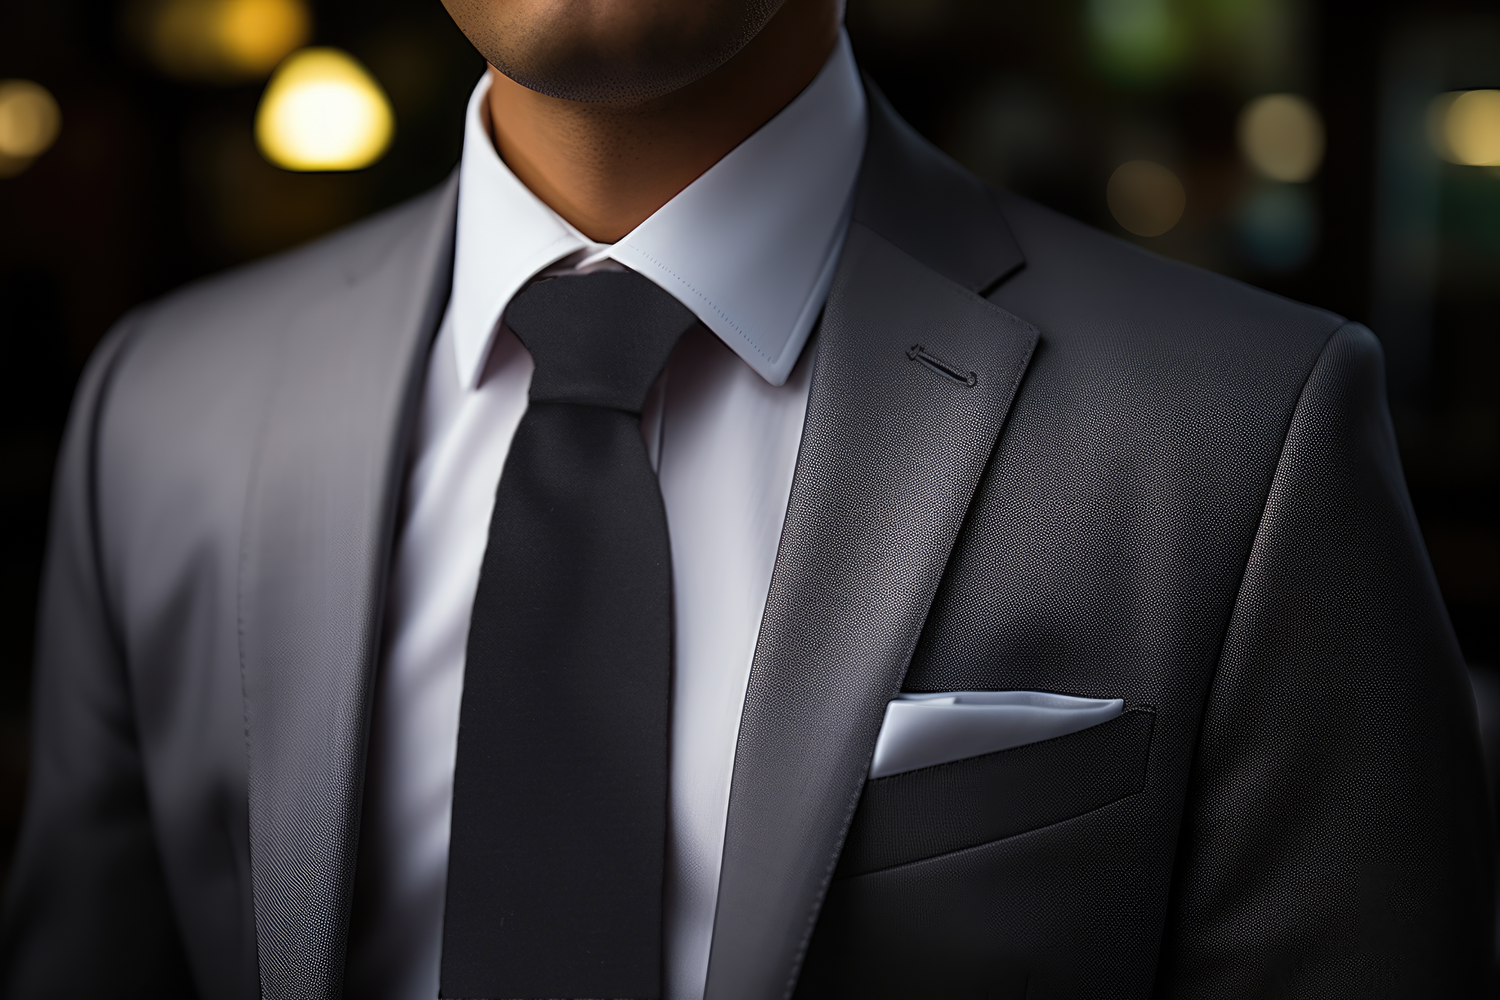 Man Wearing Black Necktie with White Shirt and Suit